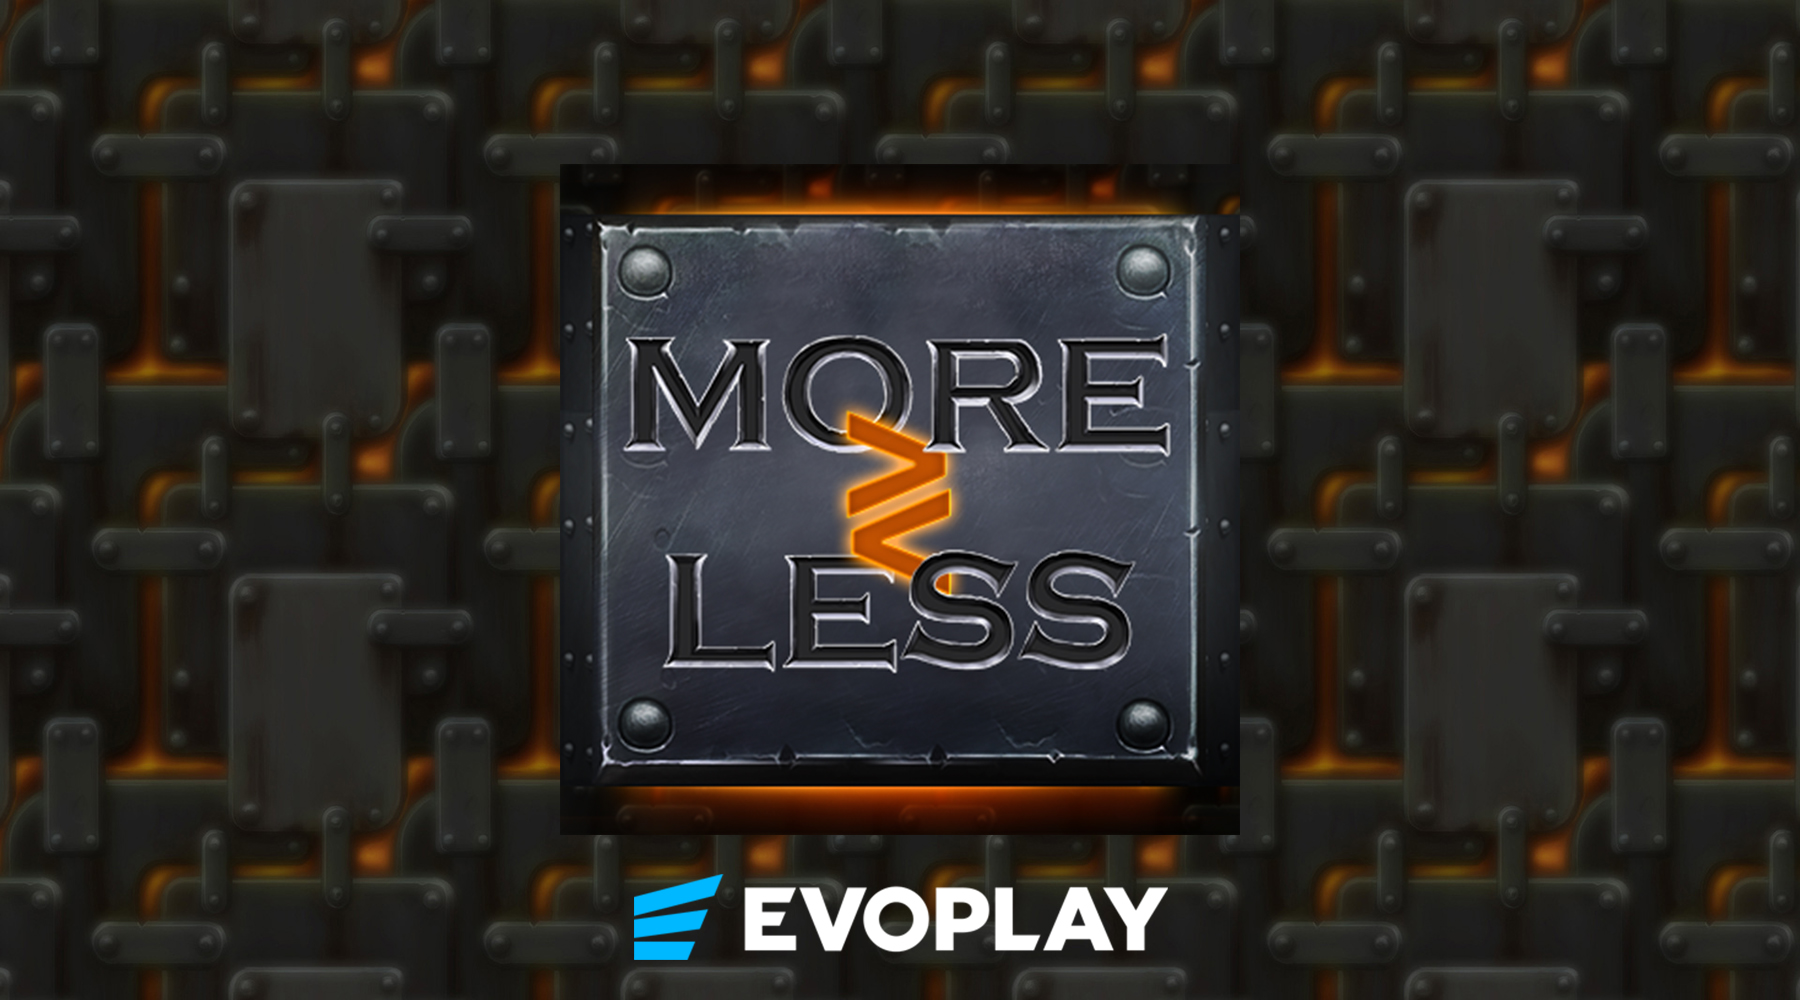 More or Less by Evoplay